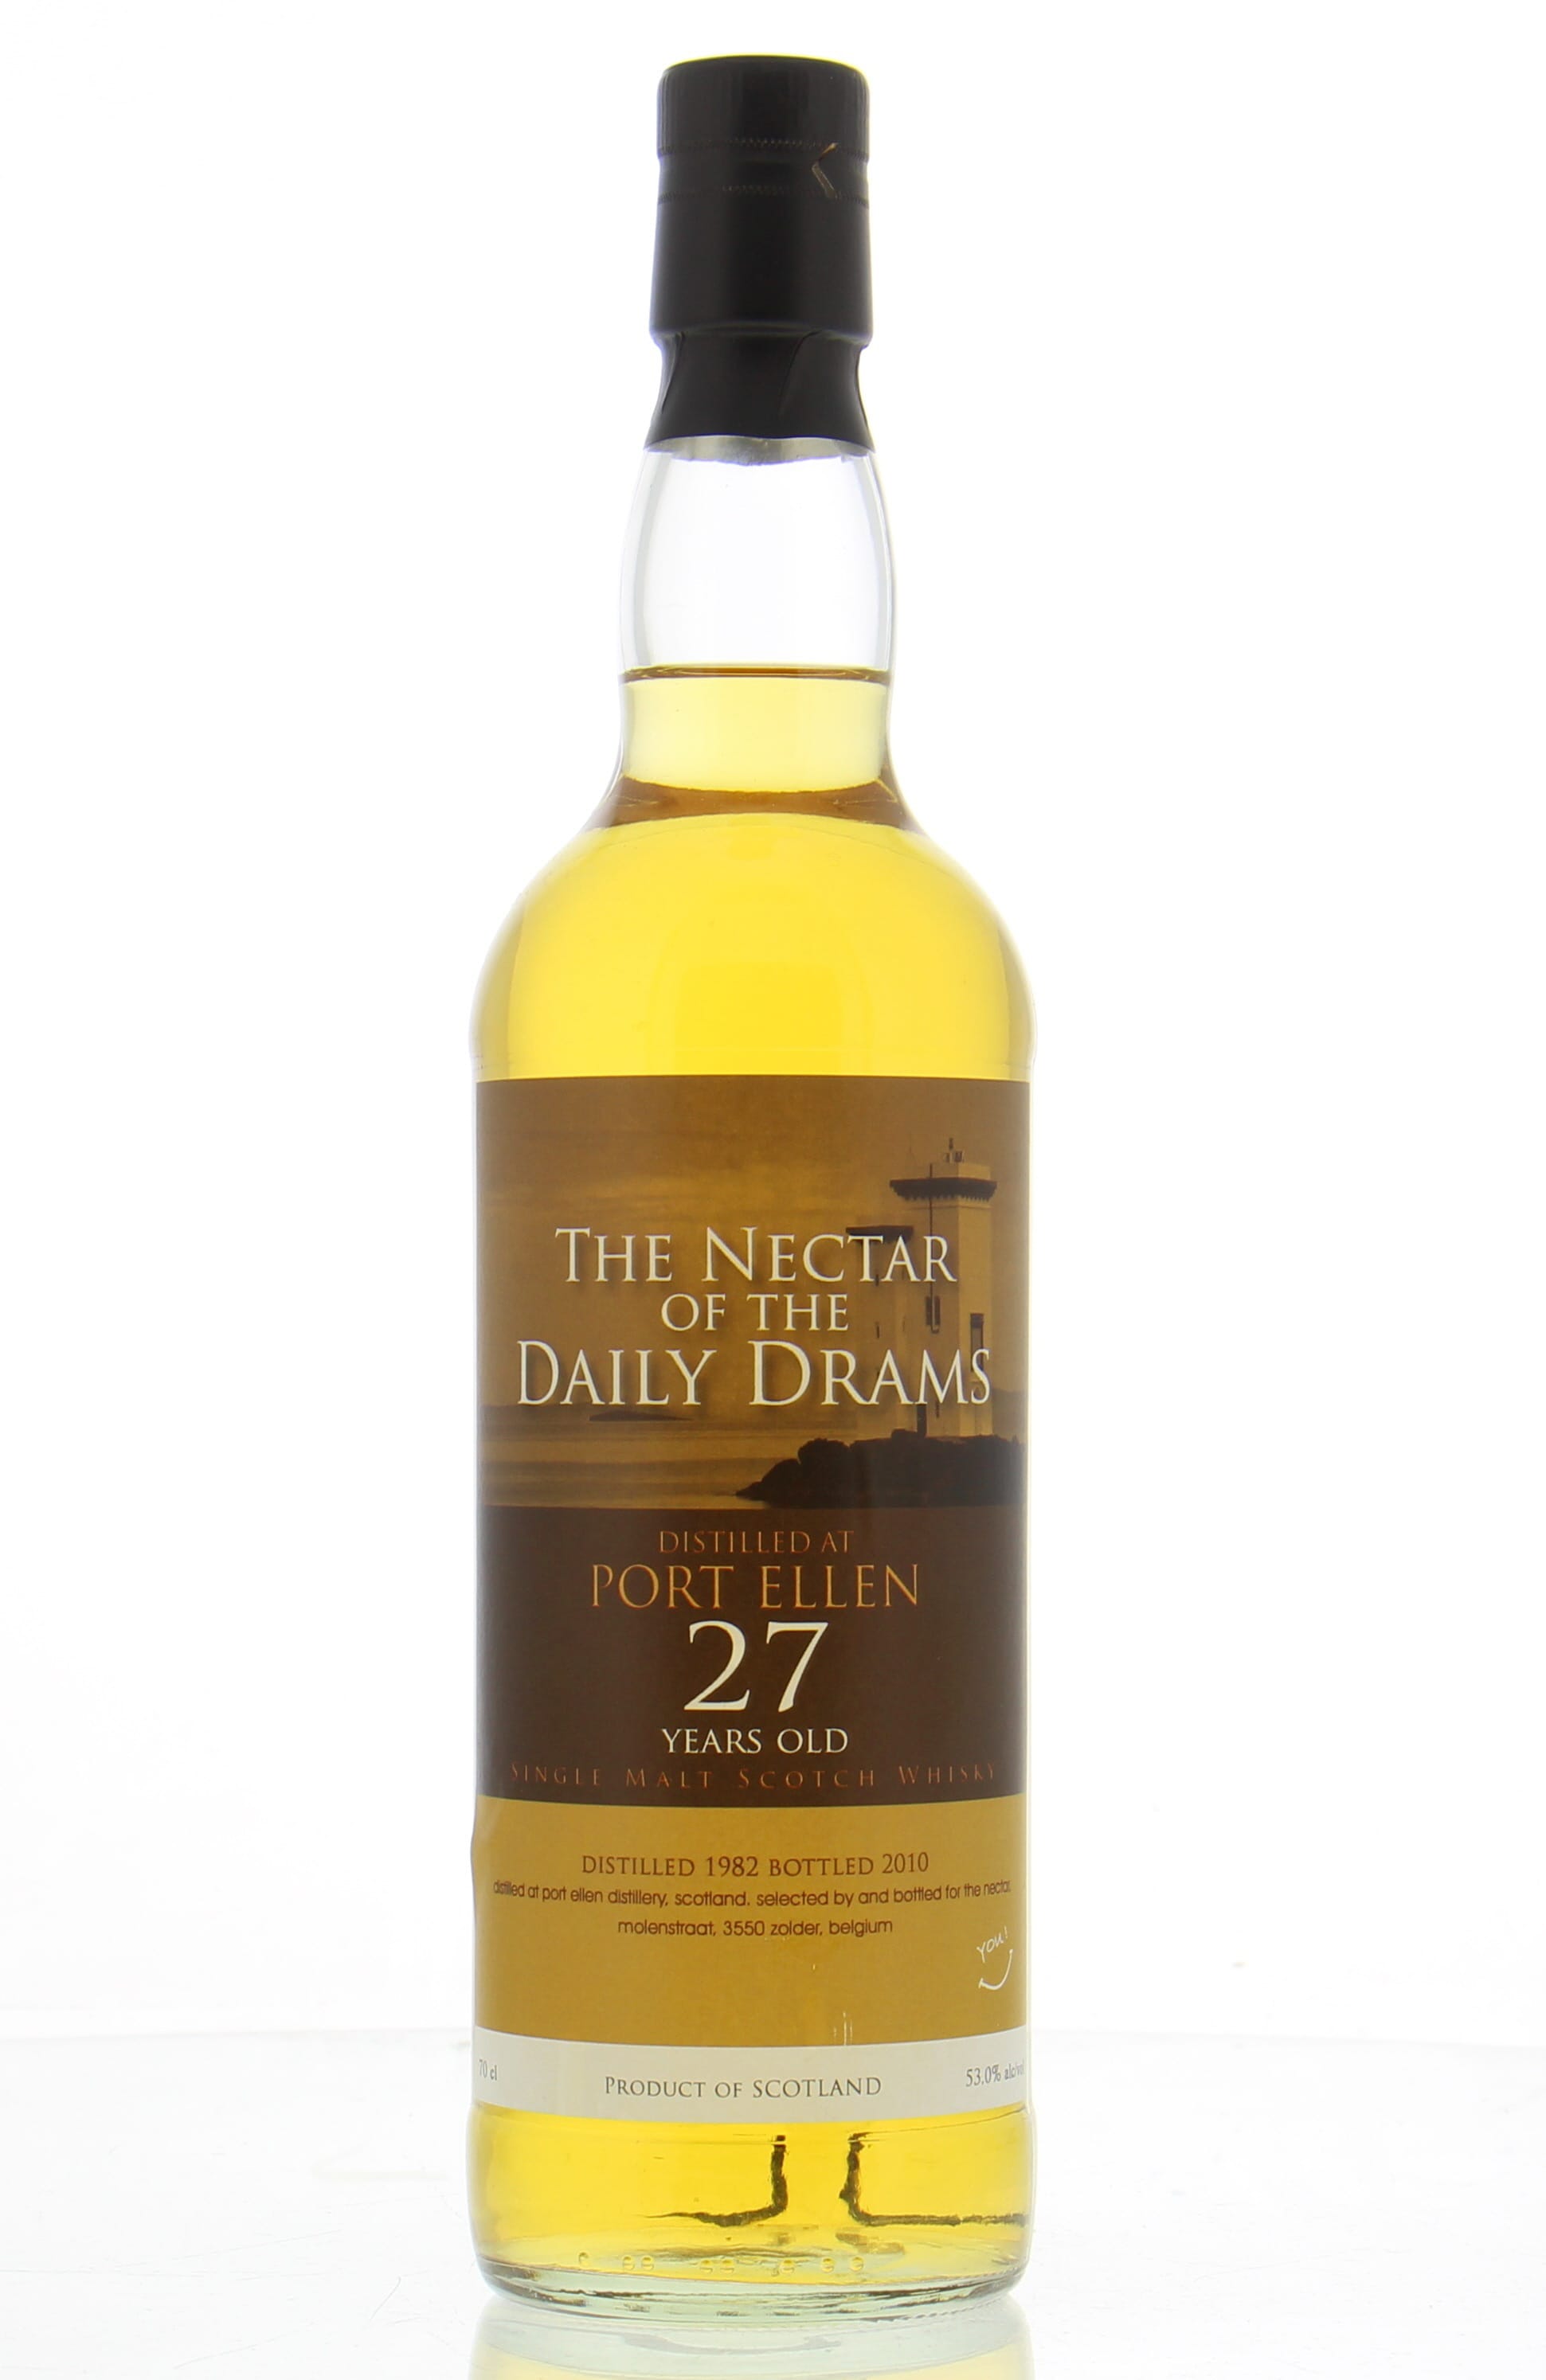 Port Ellen - 27 Years Old The Nectar of the Daily Drams 53% 1982 Nederlands